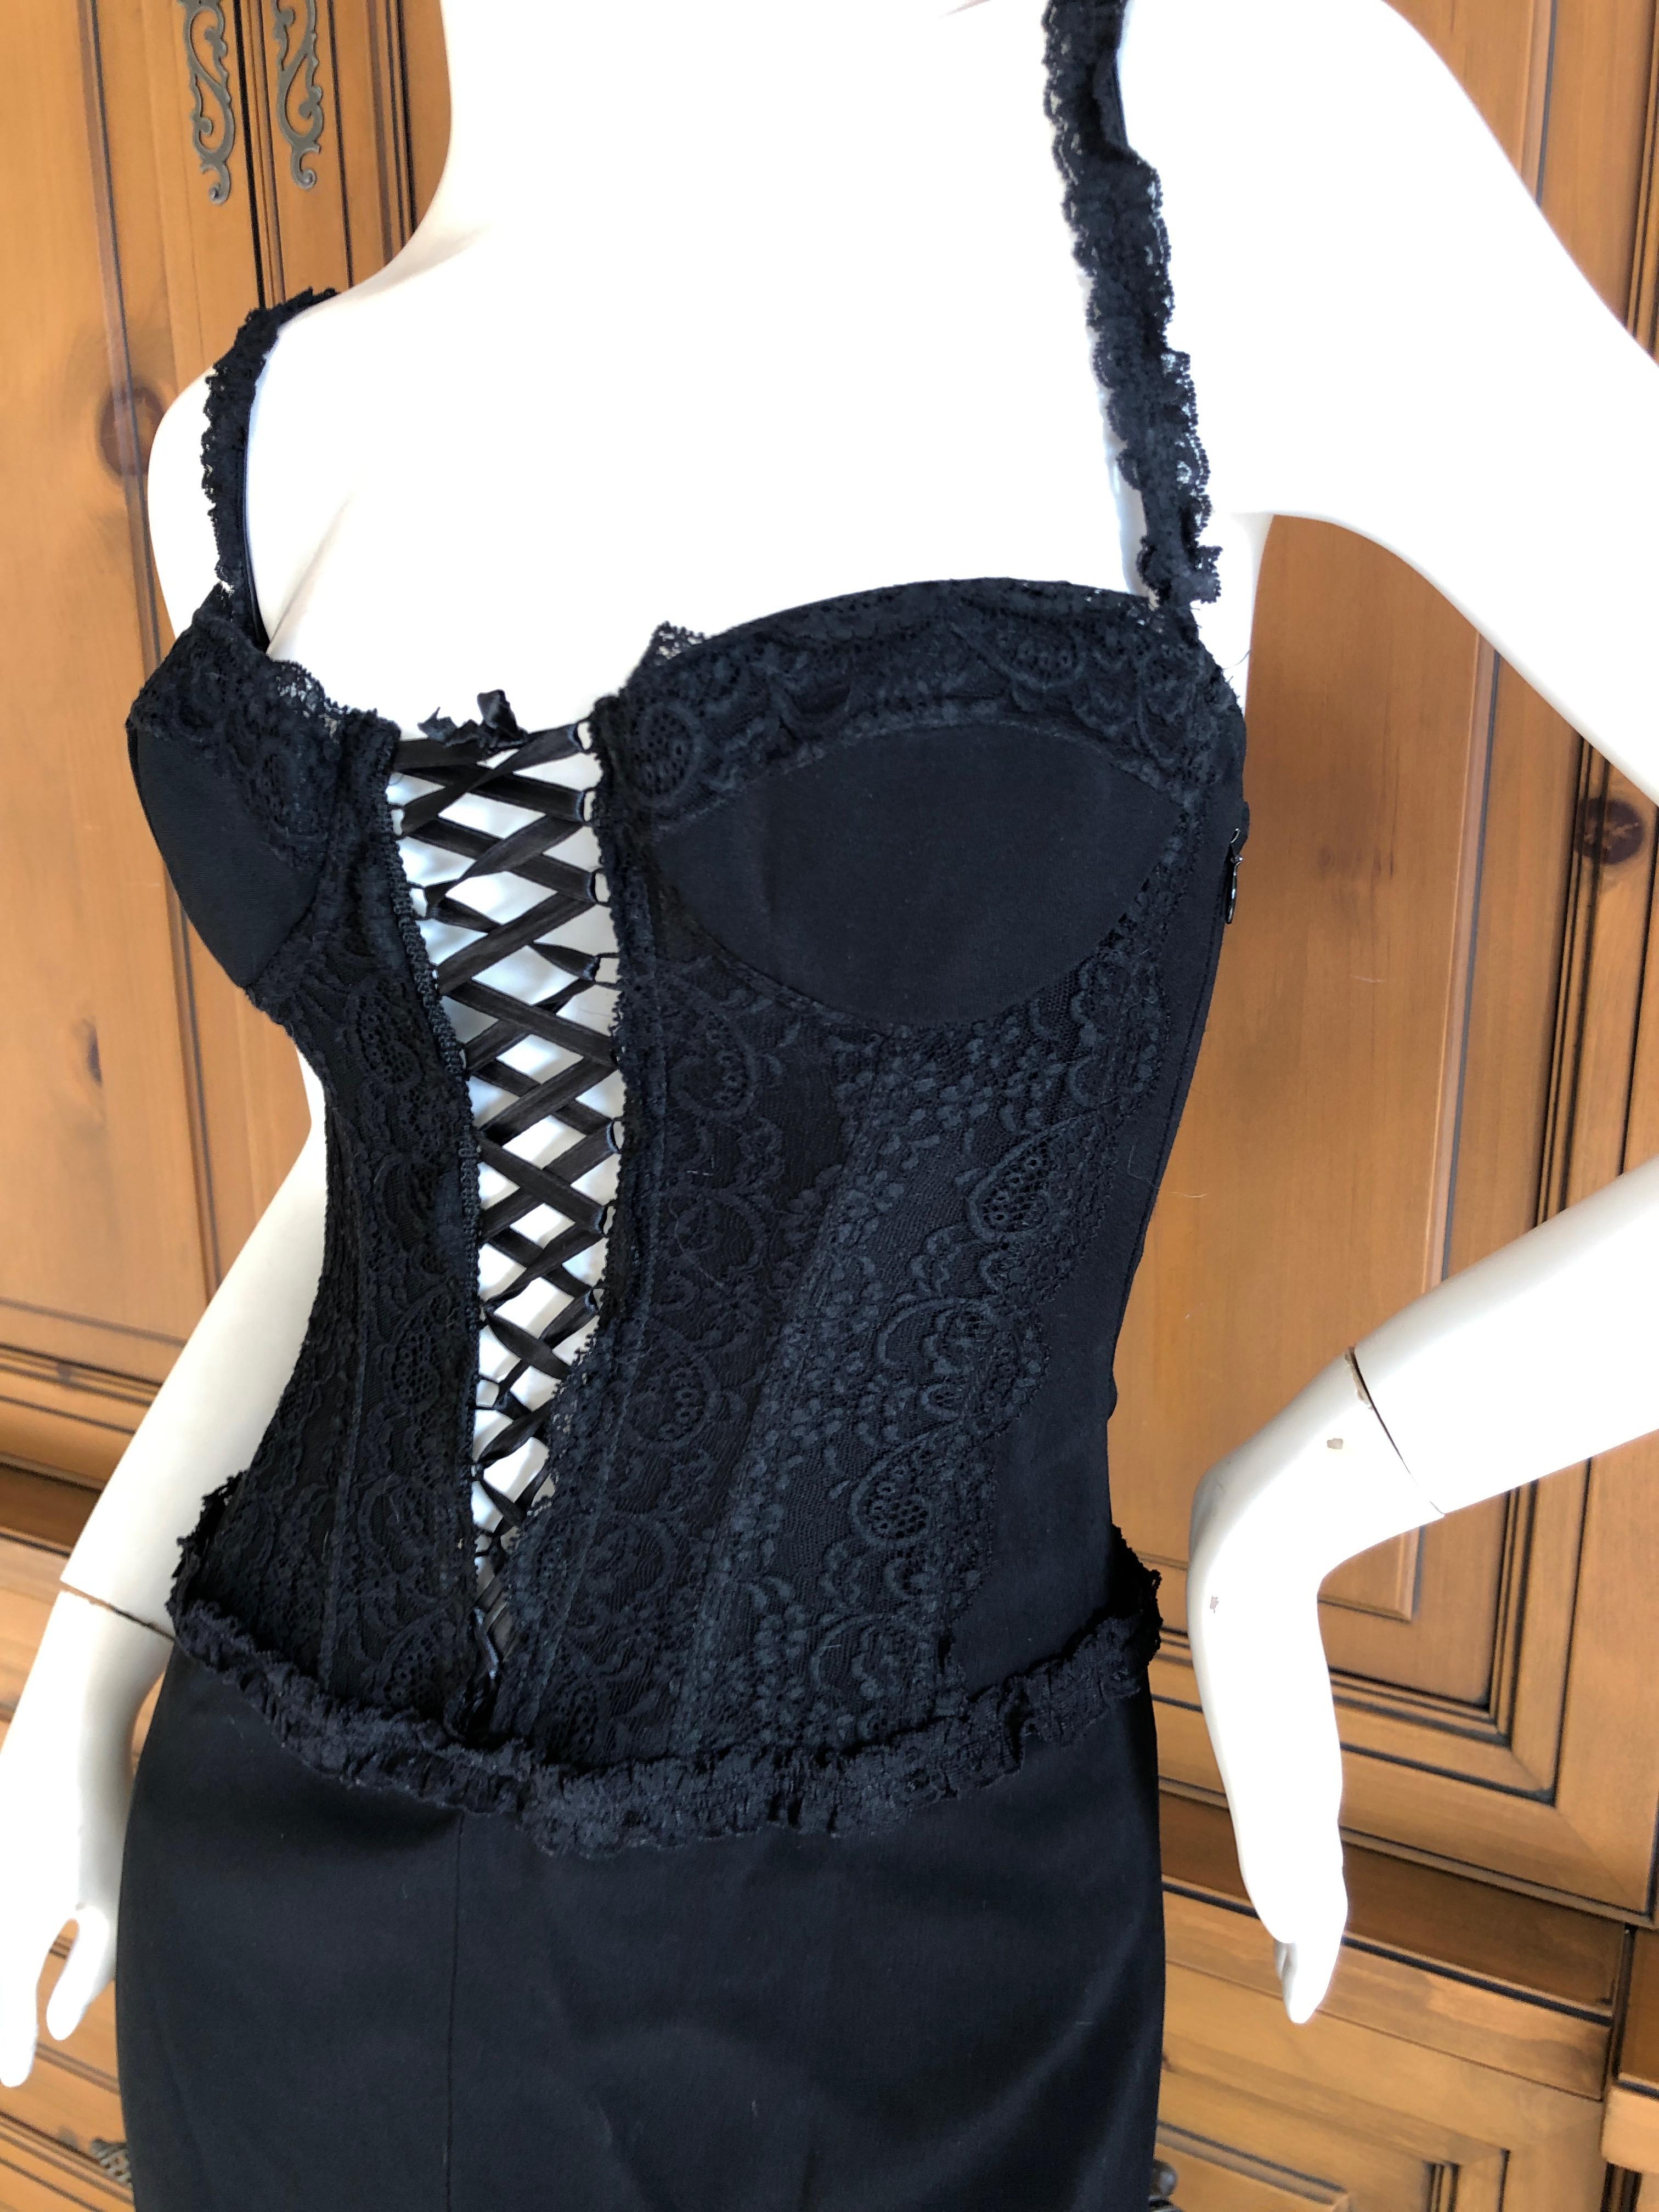 Moschino Cheap & Chic Vintage 1980's Plunging Corset Lace Evening Dress For Sale 7